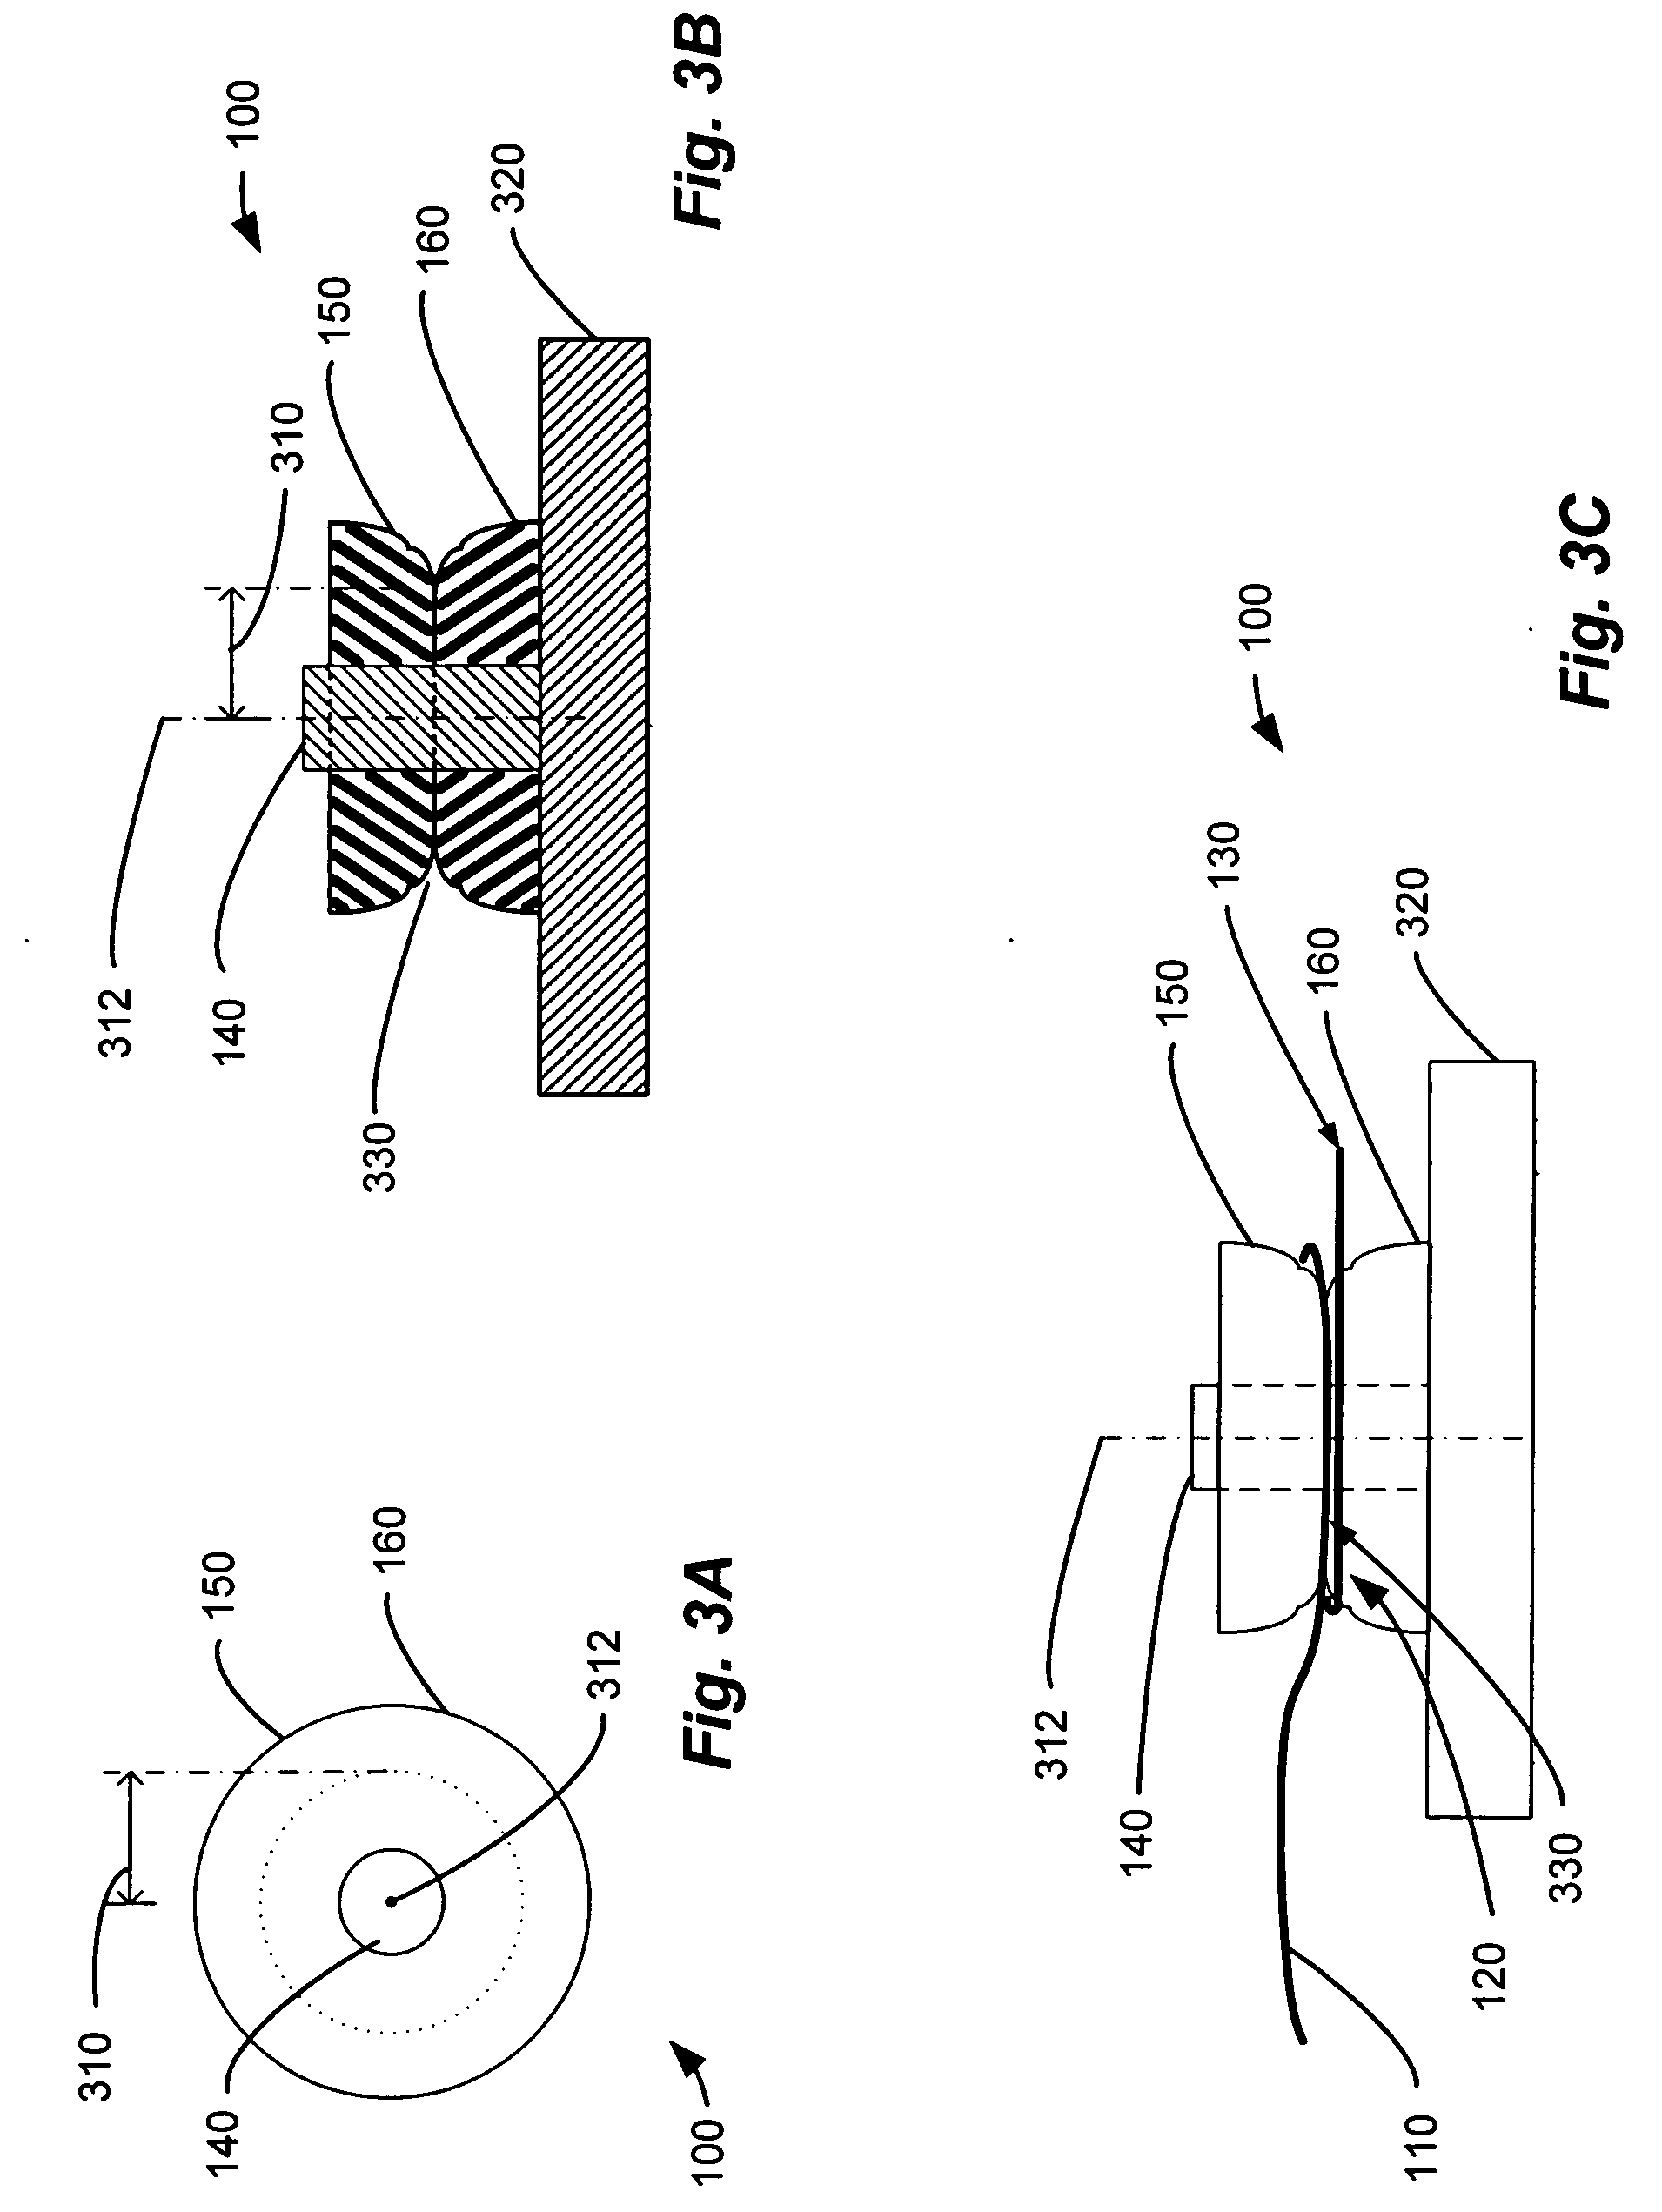 Reflection suppression for an optical fiber